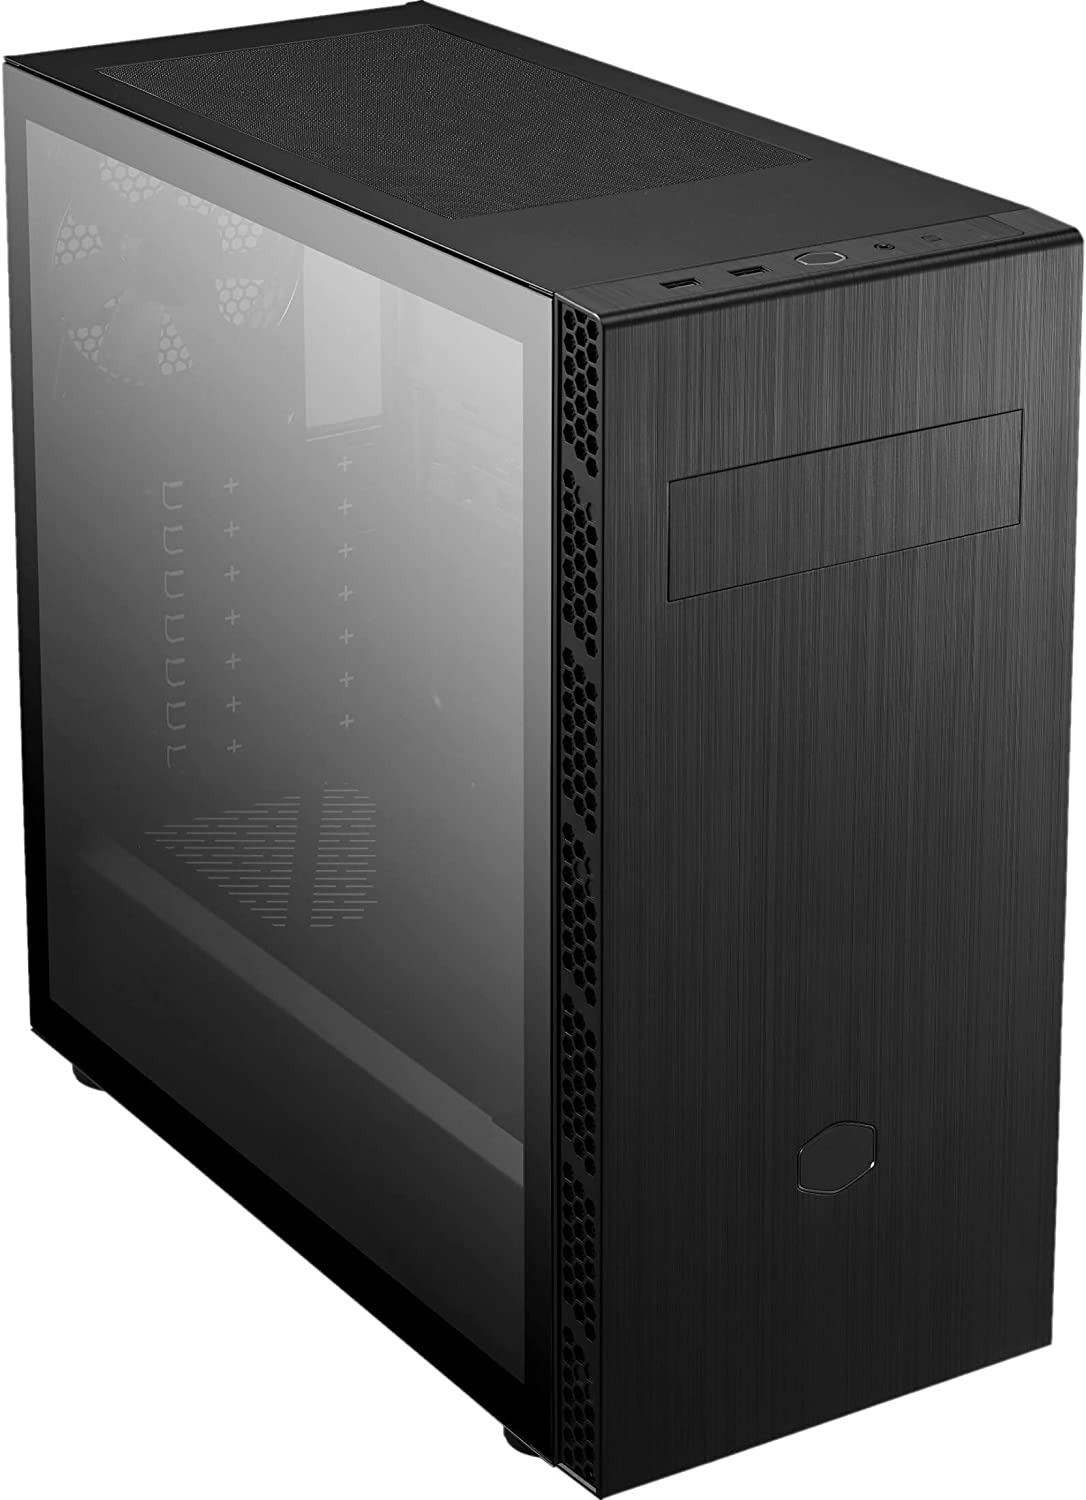 Cooler Master MB600L2 ATX Gaming Case, Side Window, USB3.0, Black, No Power Supply - CAS-MB600L2